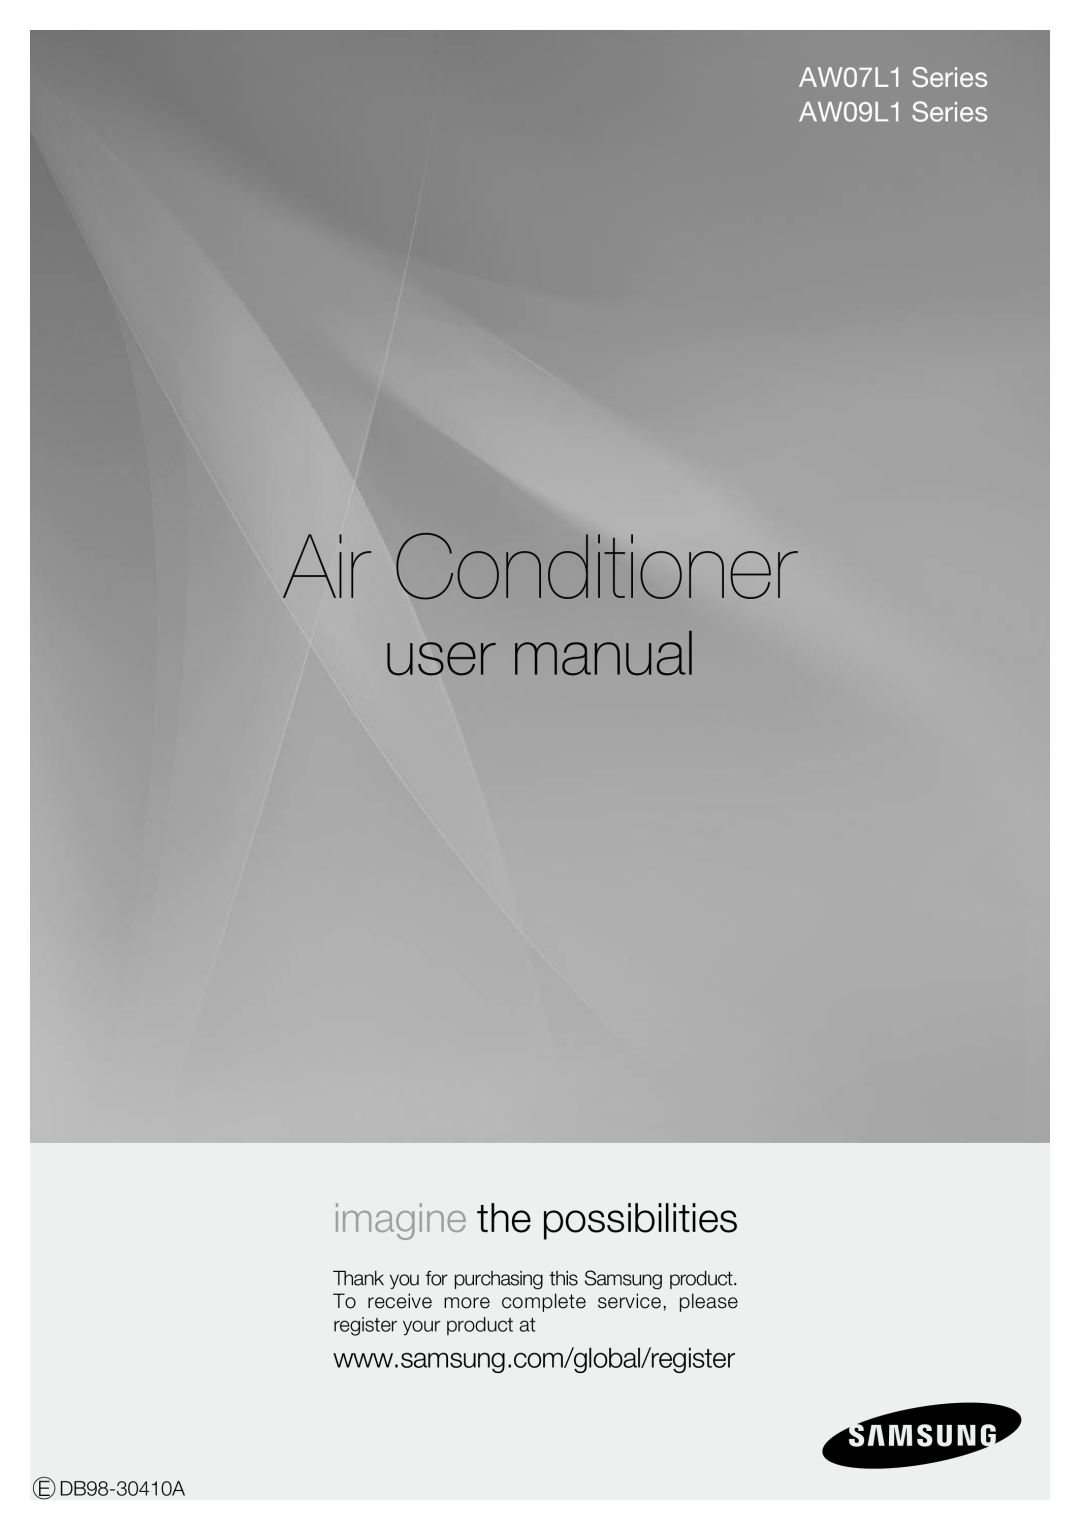 Samsung user manual Air Conditioner, imagine the possibilities, AW07L1 Series AW09L1 Series 